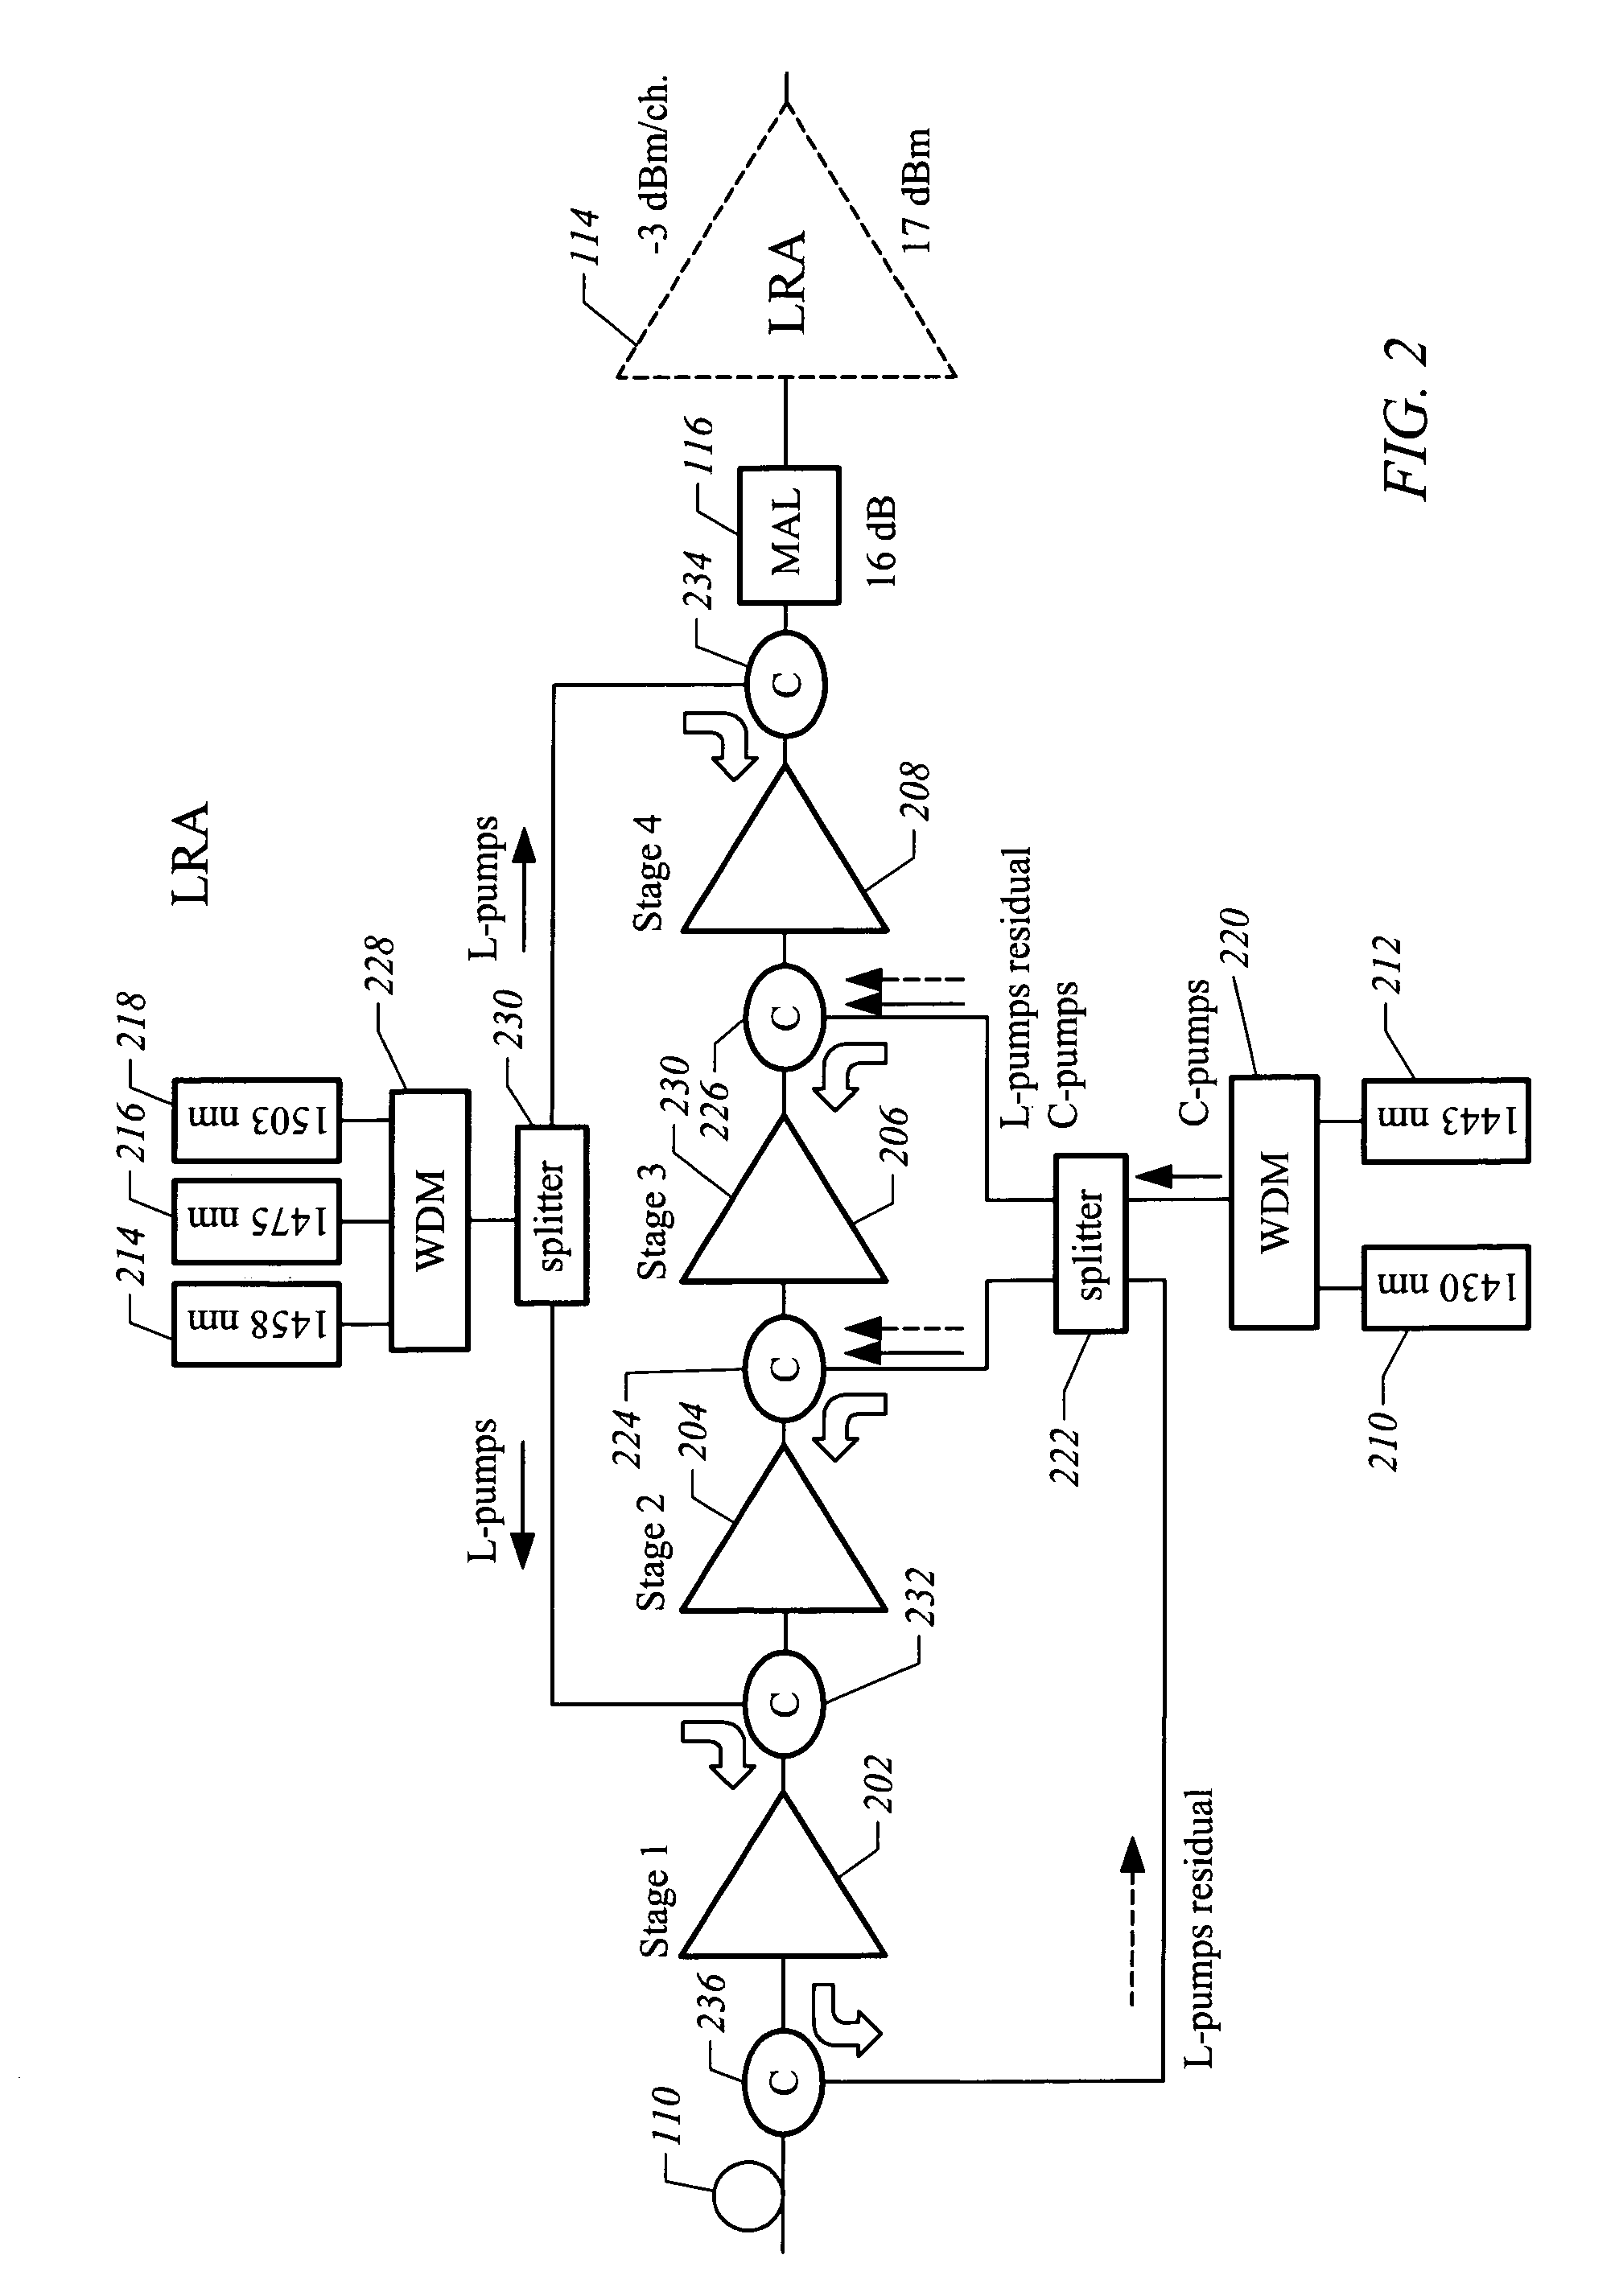 Lumped Raman amplification structure for very wideband applications